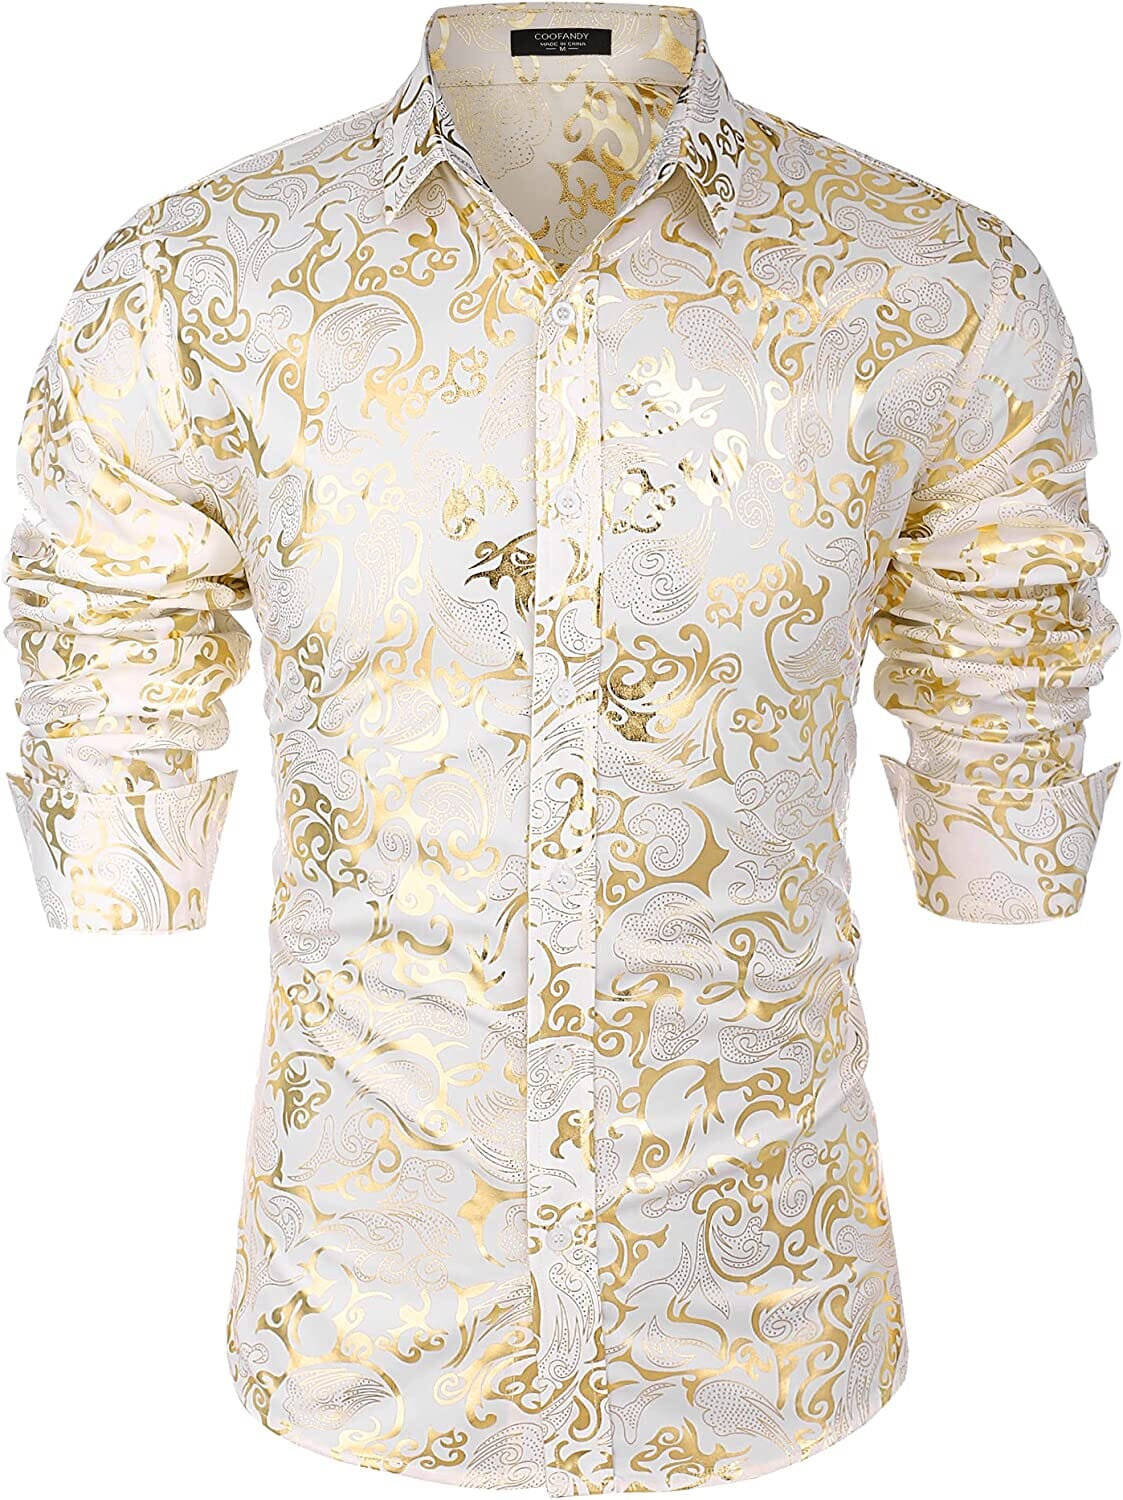 Luxury Design Floral Dress Shirt (US Only) Shirts COOFANDY Store Pat7 S 